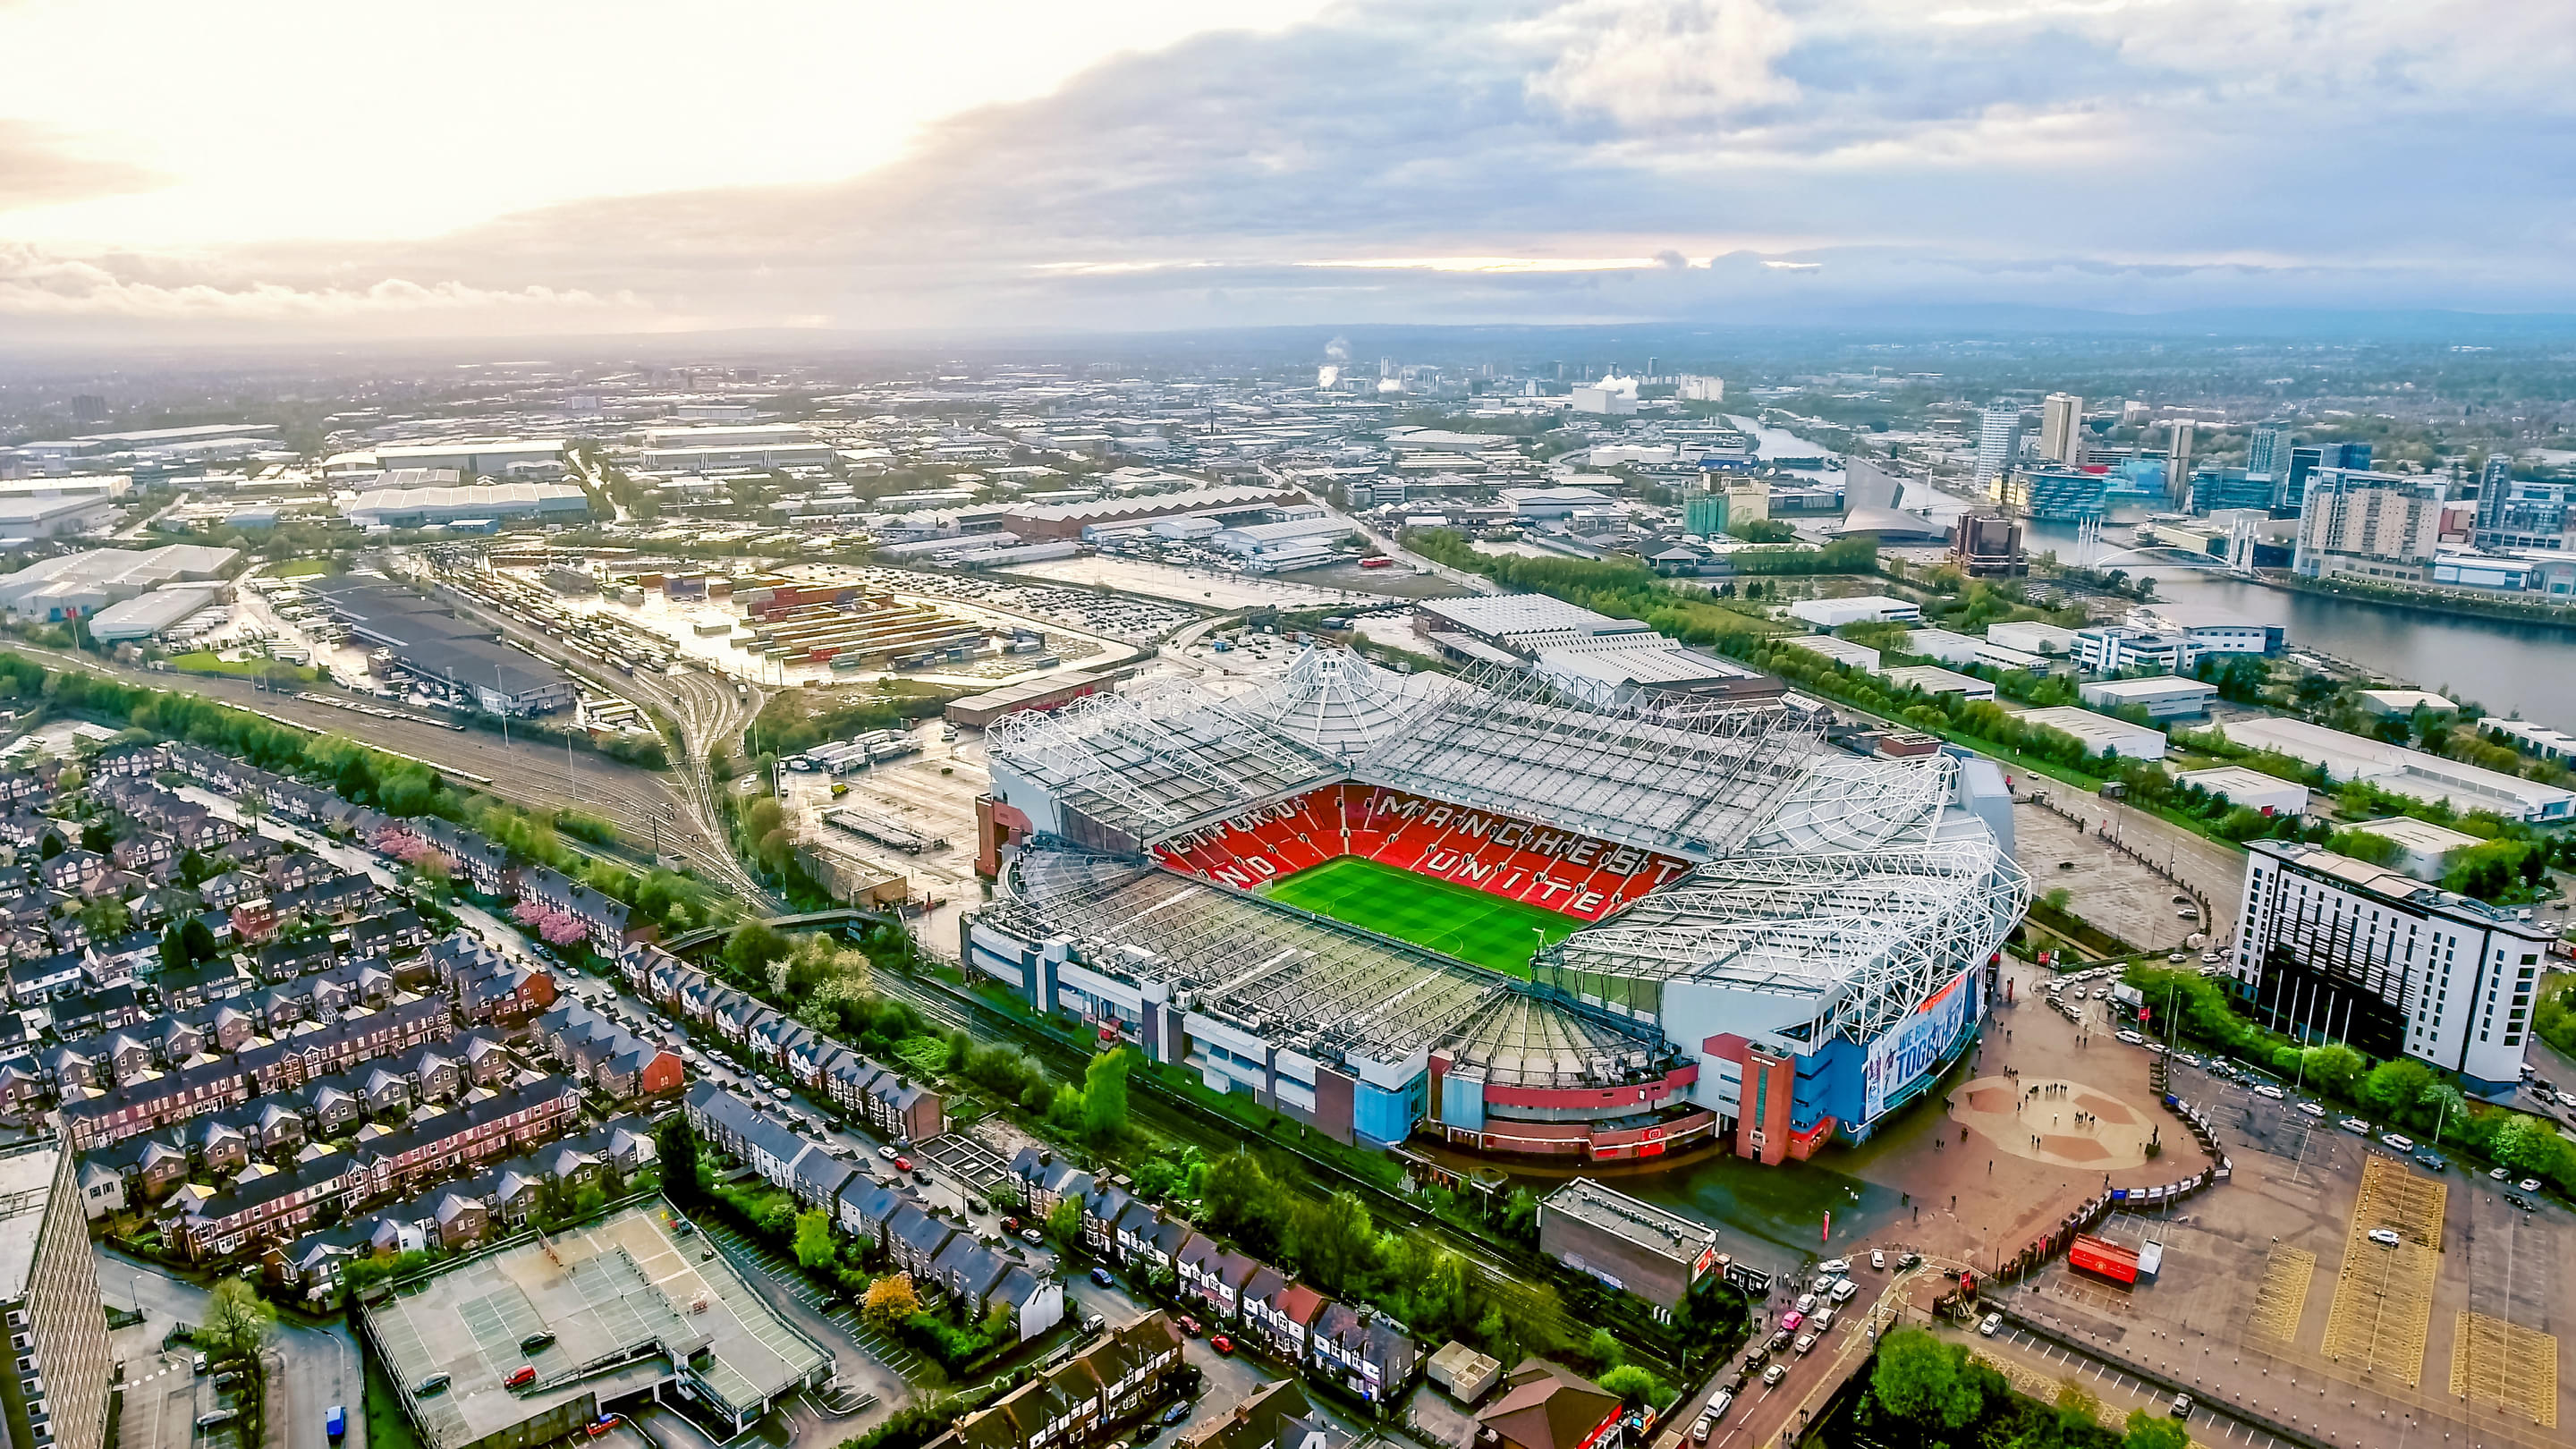 Old Trafford Overview